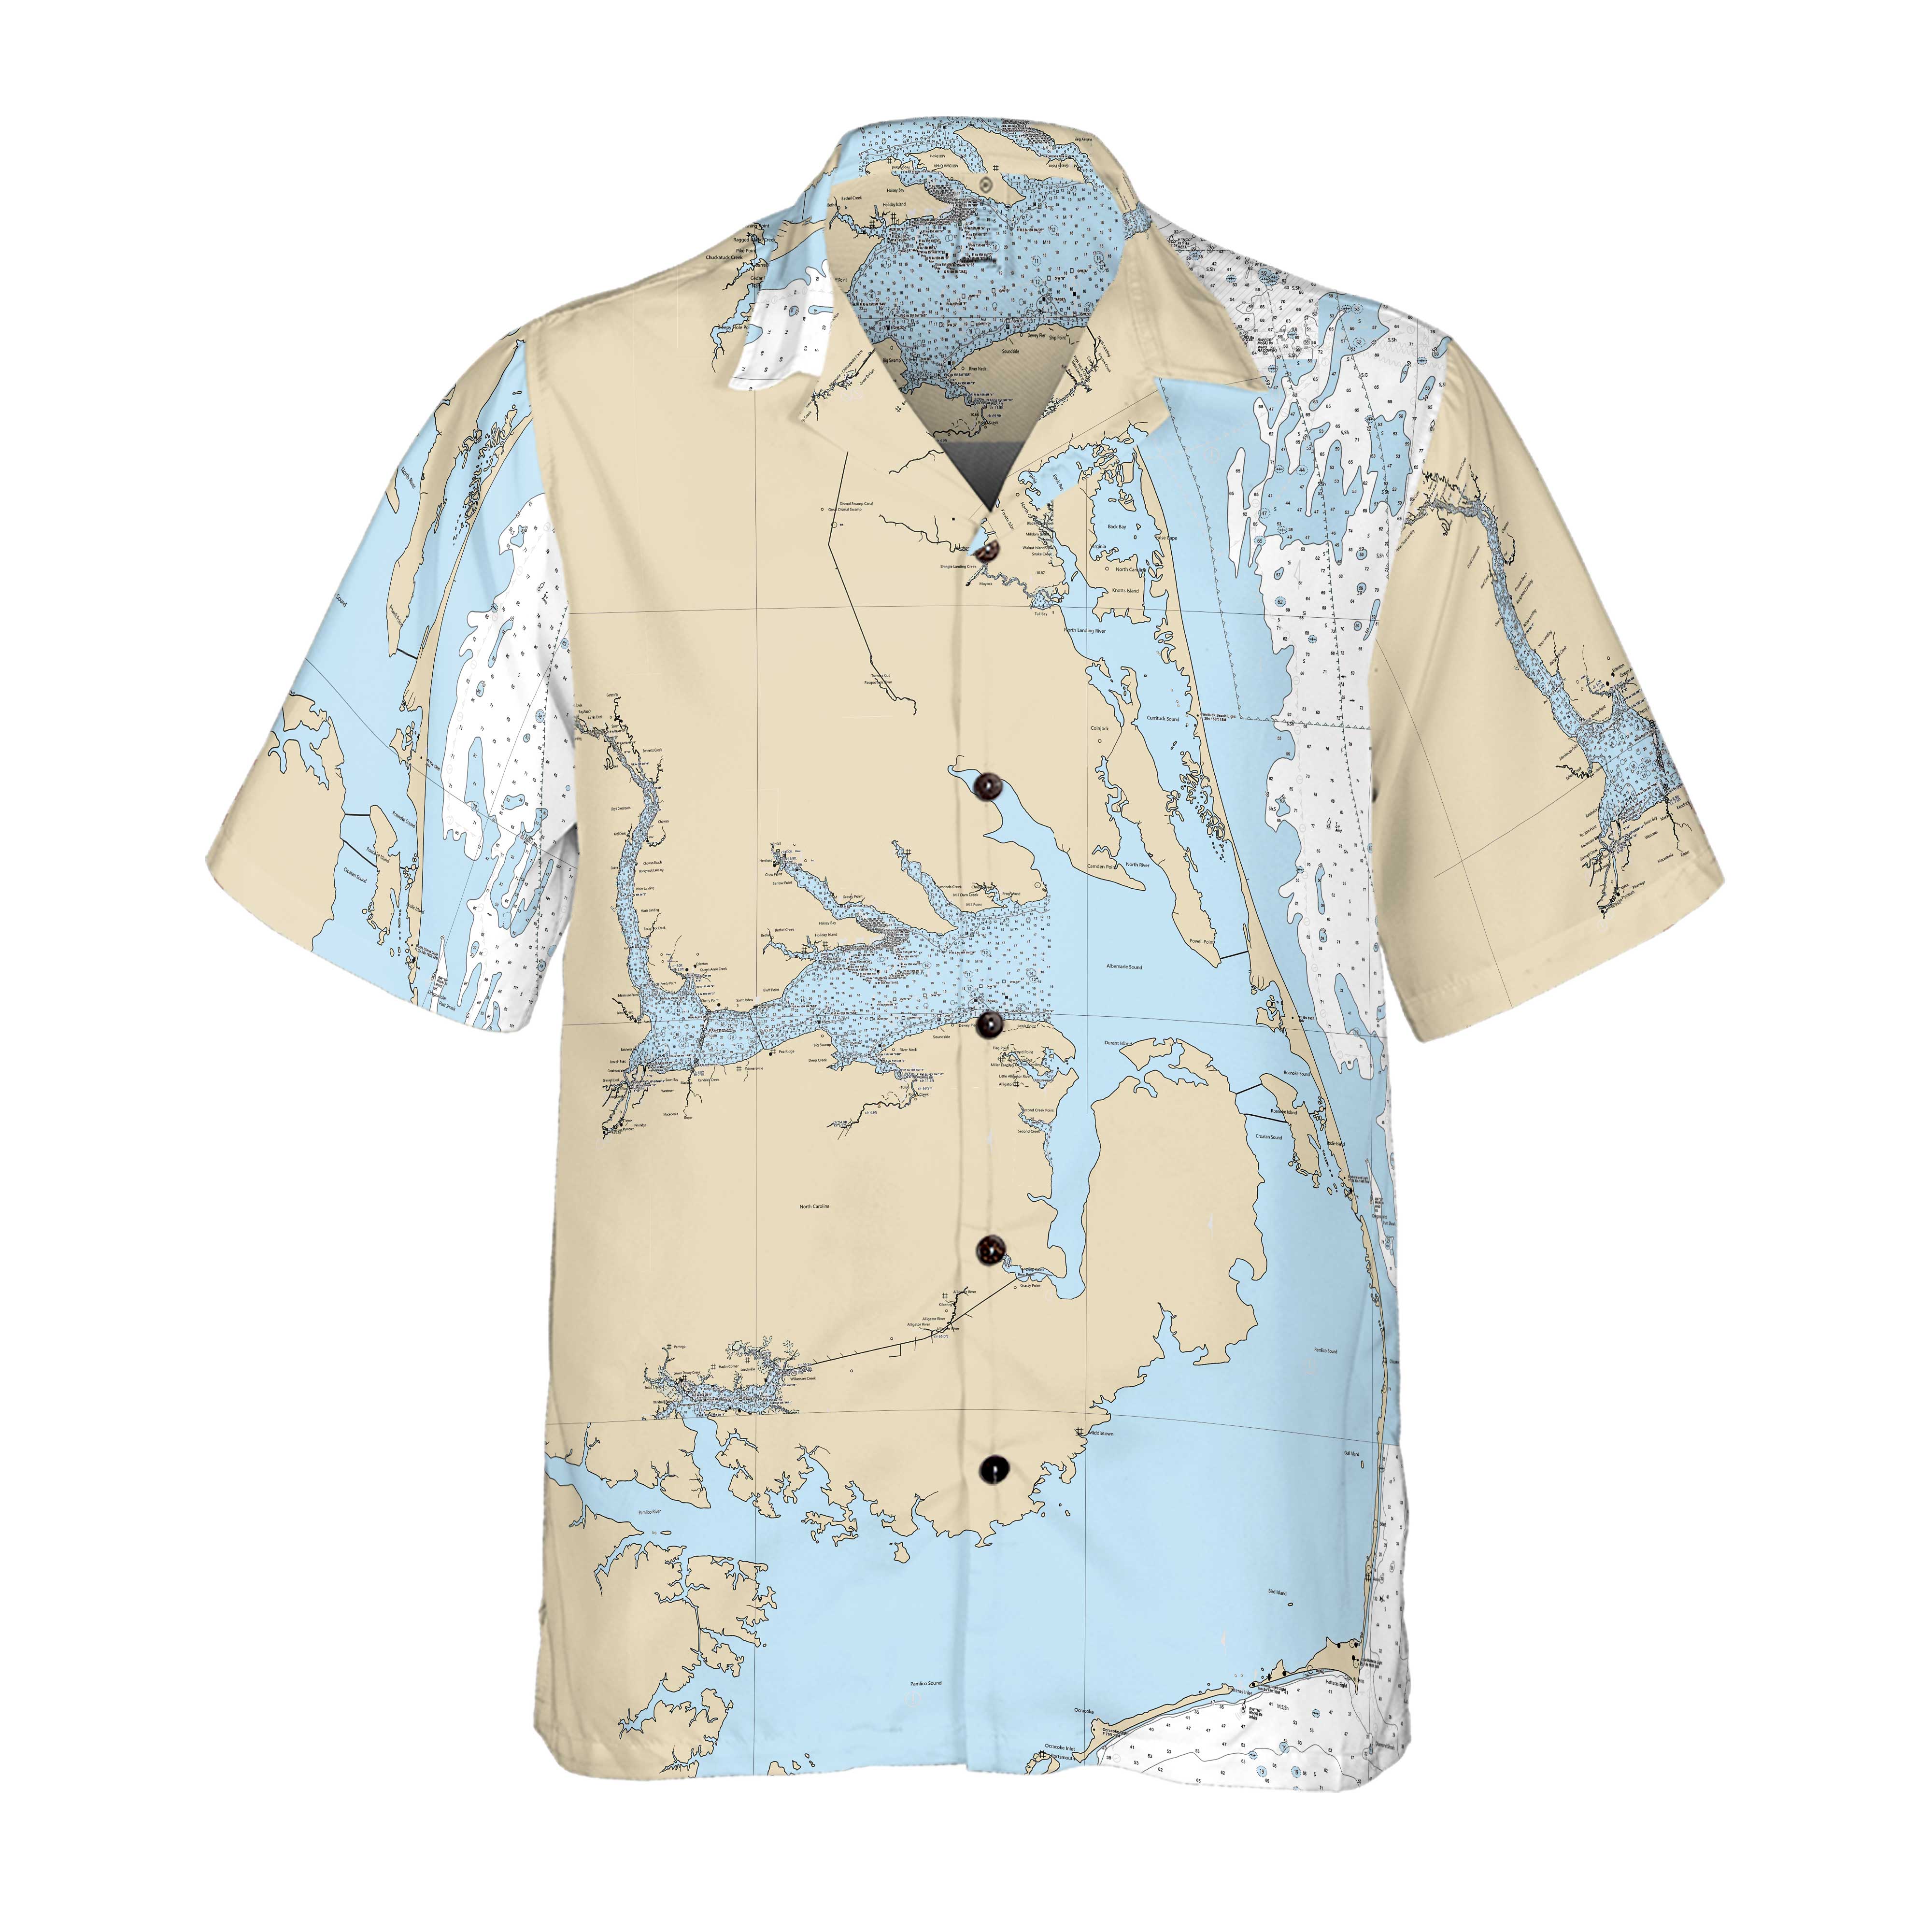 The Albemarle Sound Coconut Button Camp Shirt